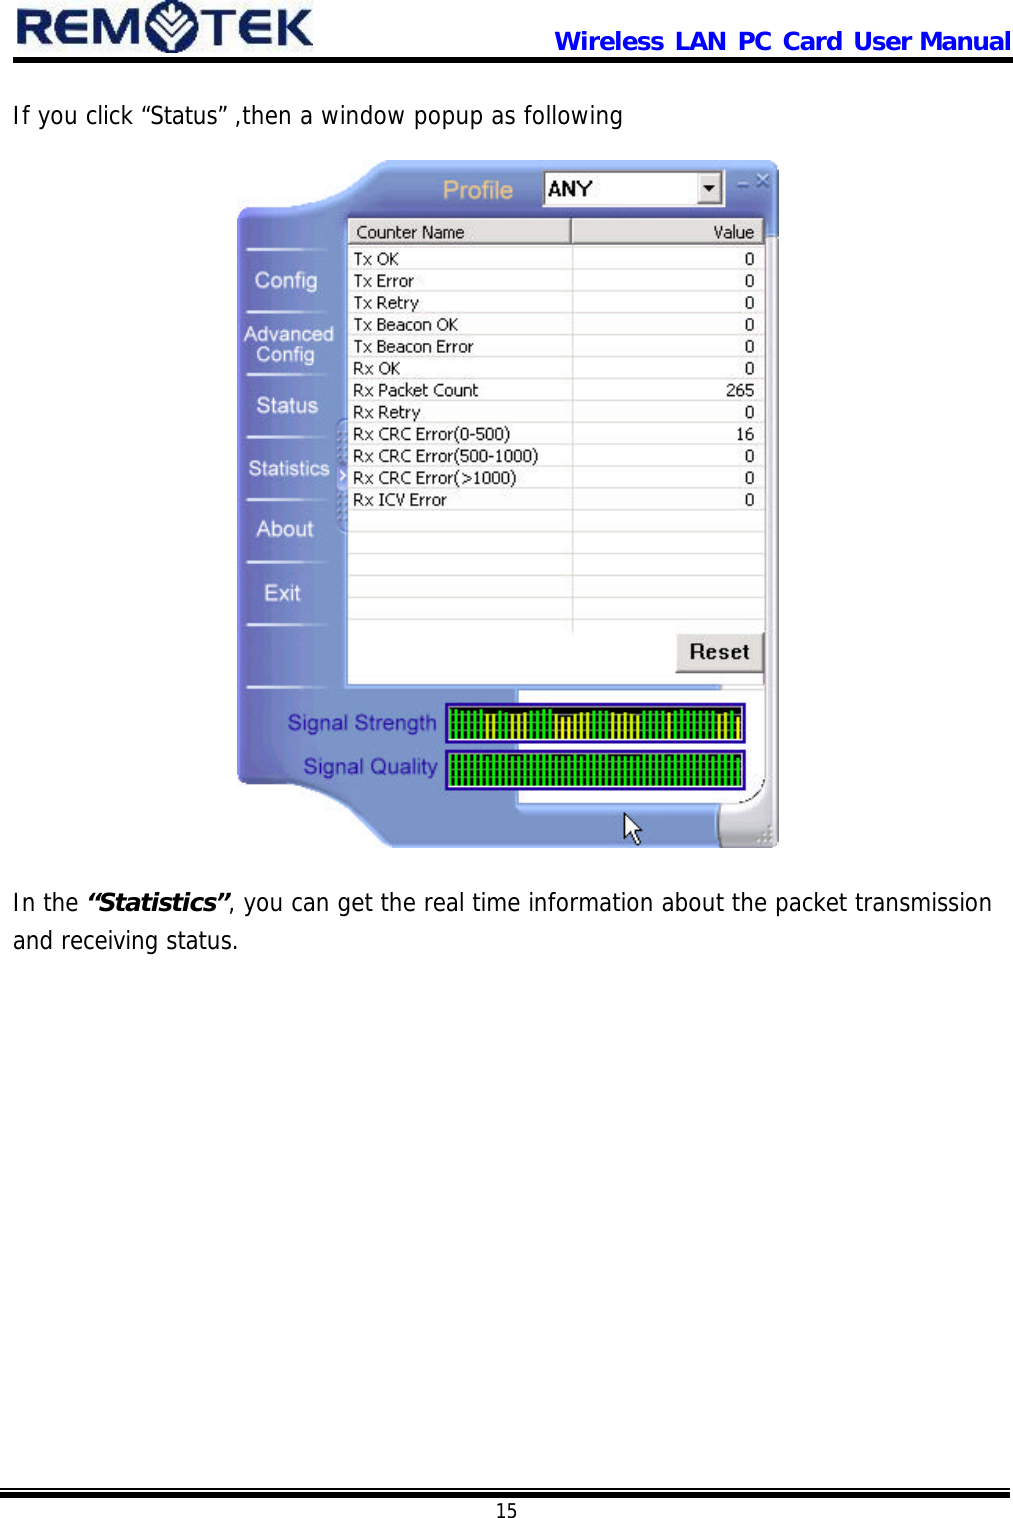                      Wireless LAN PC Card User Manual            15  If you click “Status” ,then a window popup as following                     In the “Statistics”, you can get the real time information about the packet transmission and receiving status.  